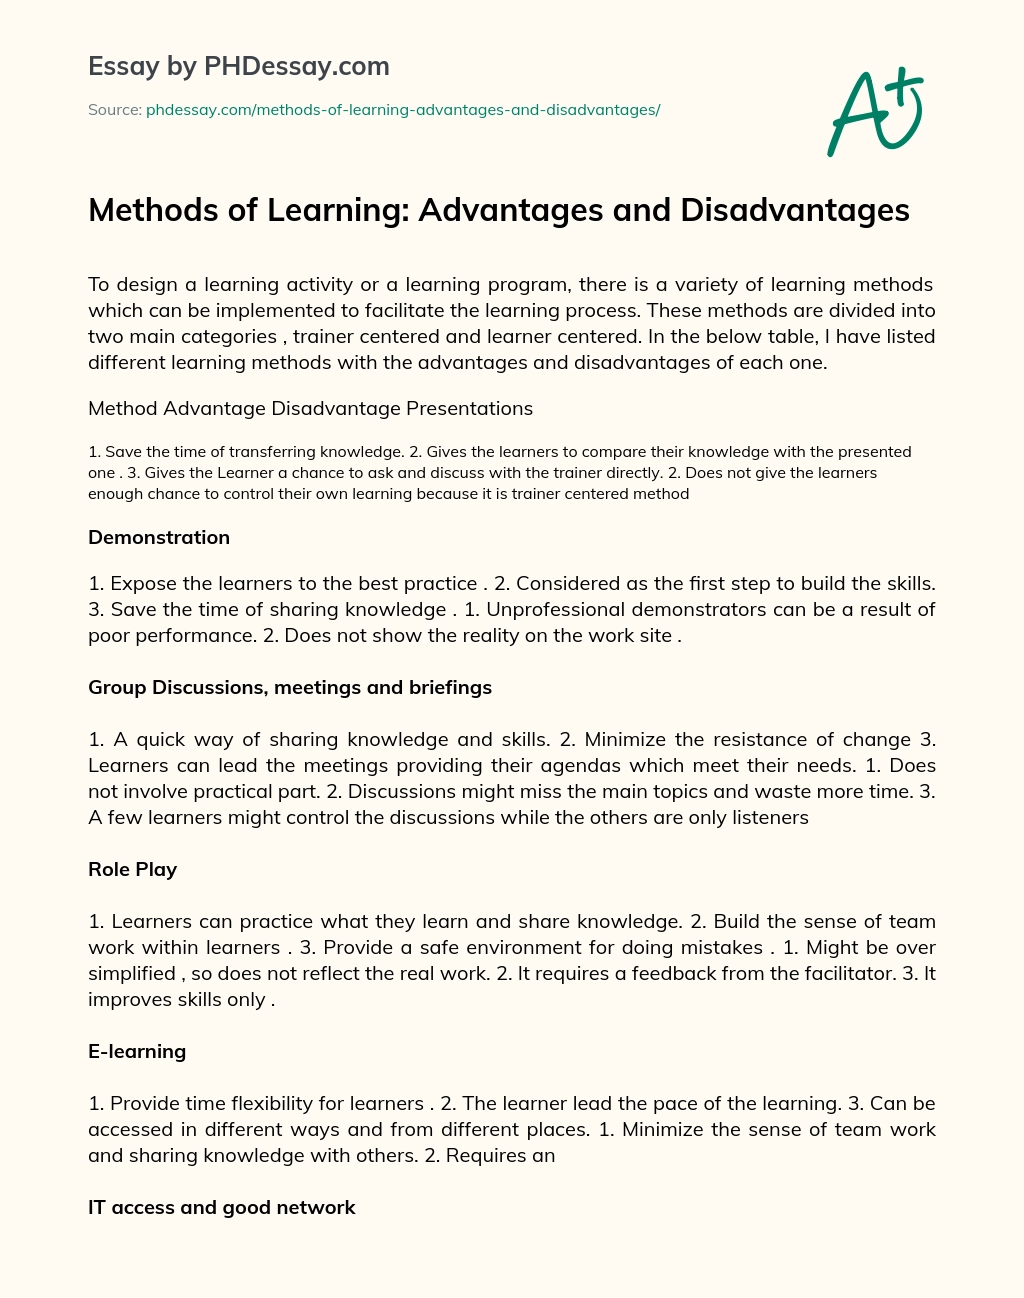 Methods of Learning: Advantages and Disadvantages essay